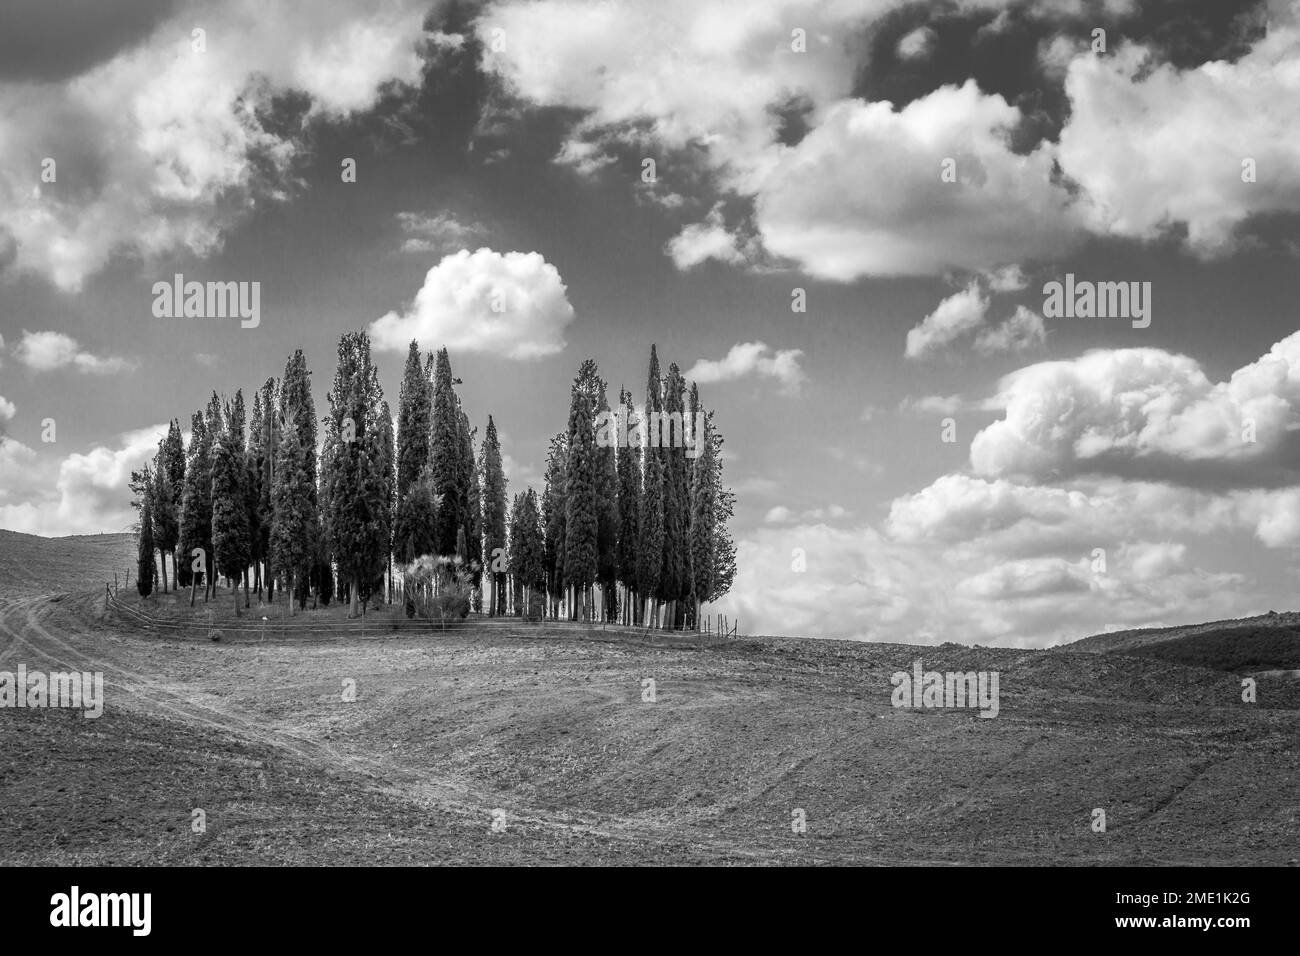 The iconic circle of cypress trees in Tuscany's Val d'Orcia; the most photographed trees in the world. Italy. Stock Photo